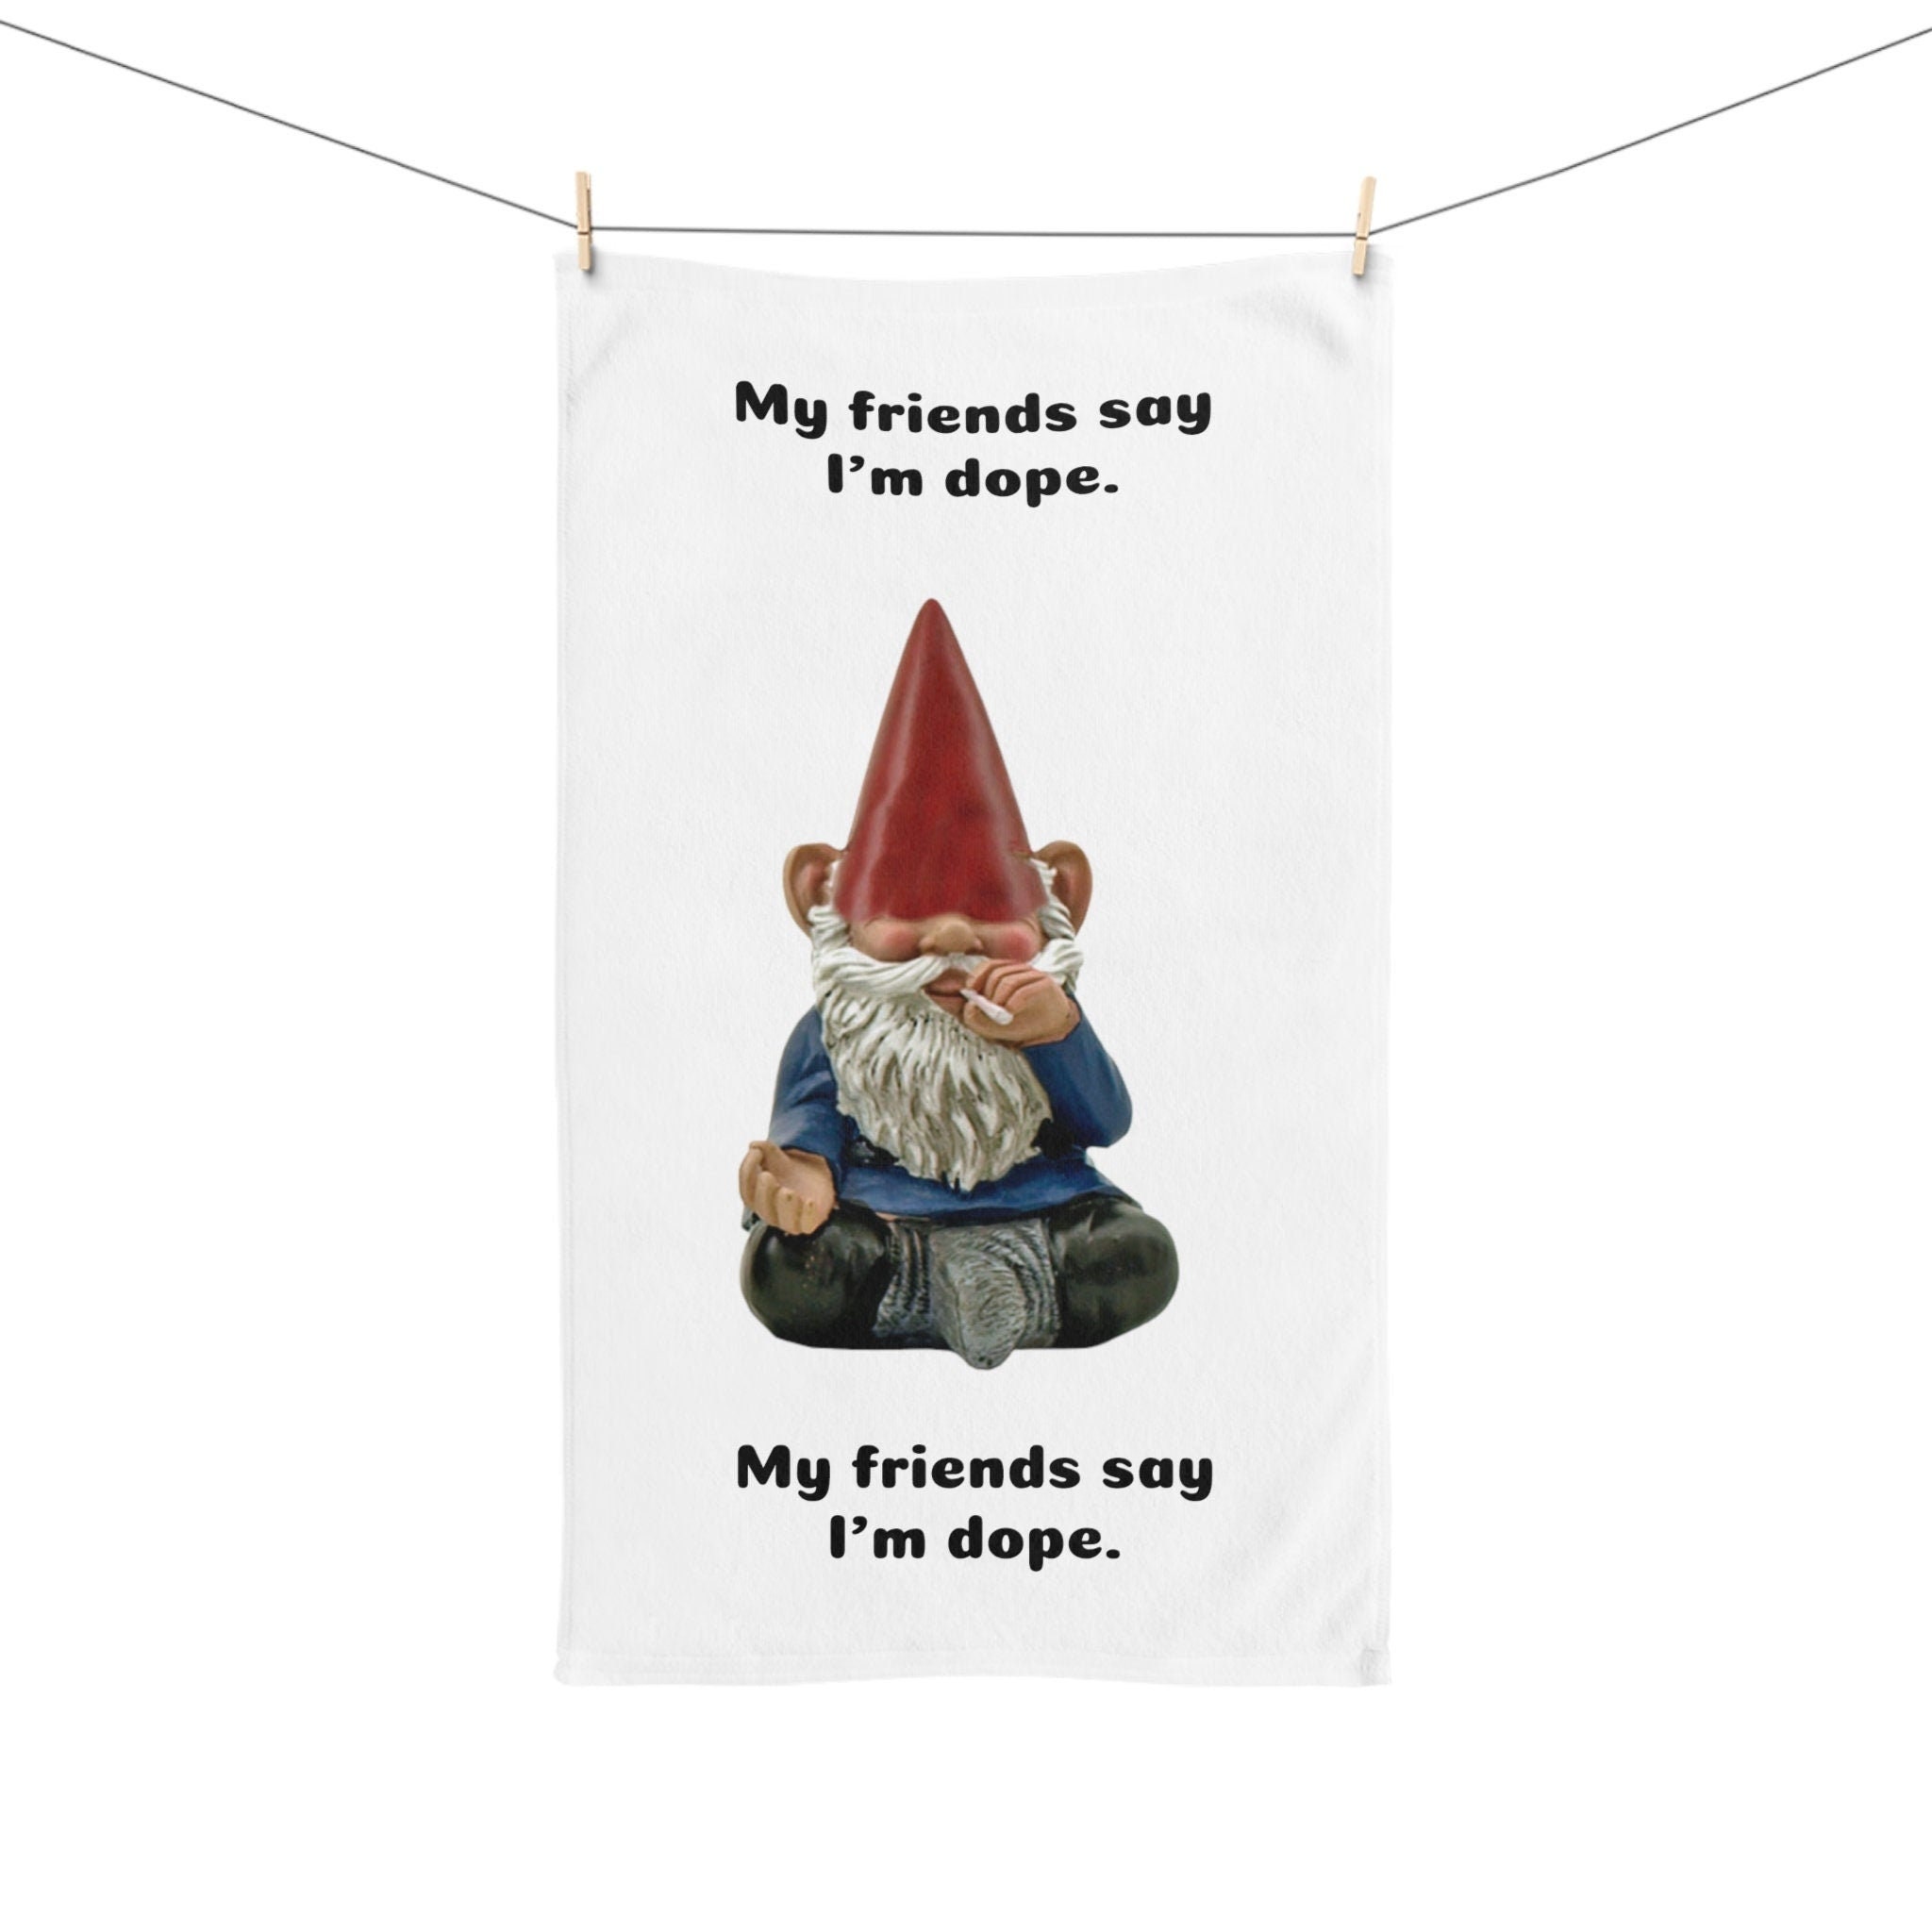 Funny Flamingo YouRe So Tacky Gnome Gift Bath Towel by Noirty